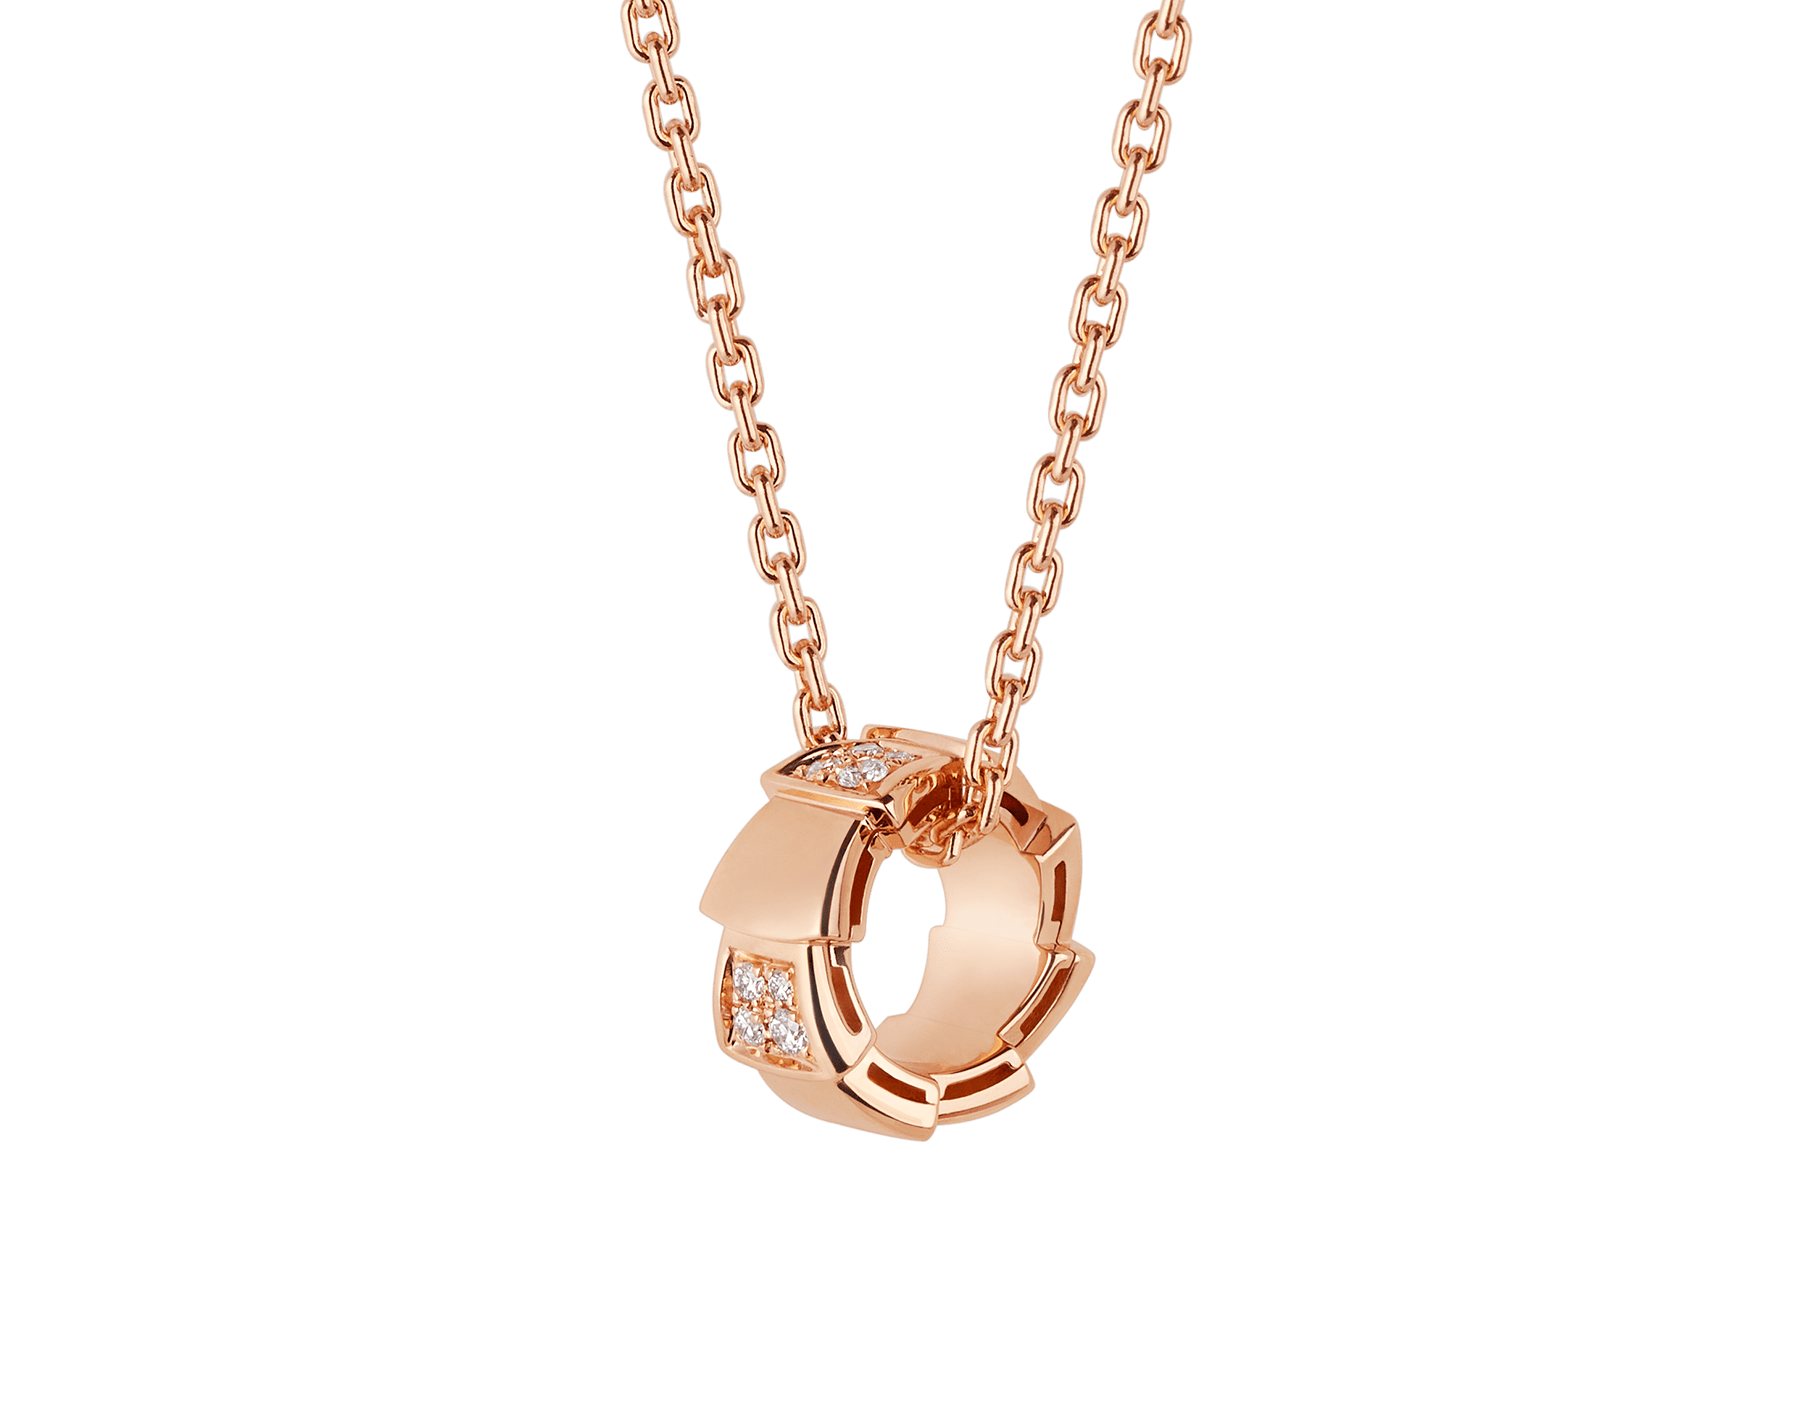 Wholesale Custom design jewelry necklace OEM/ODM Jewelry with 18 kt rose gold chain and 18 kt rose gold pendant set with demi-pavé diamonds oem factory